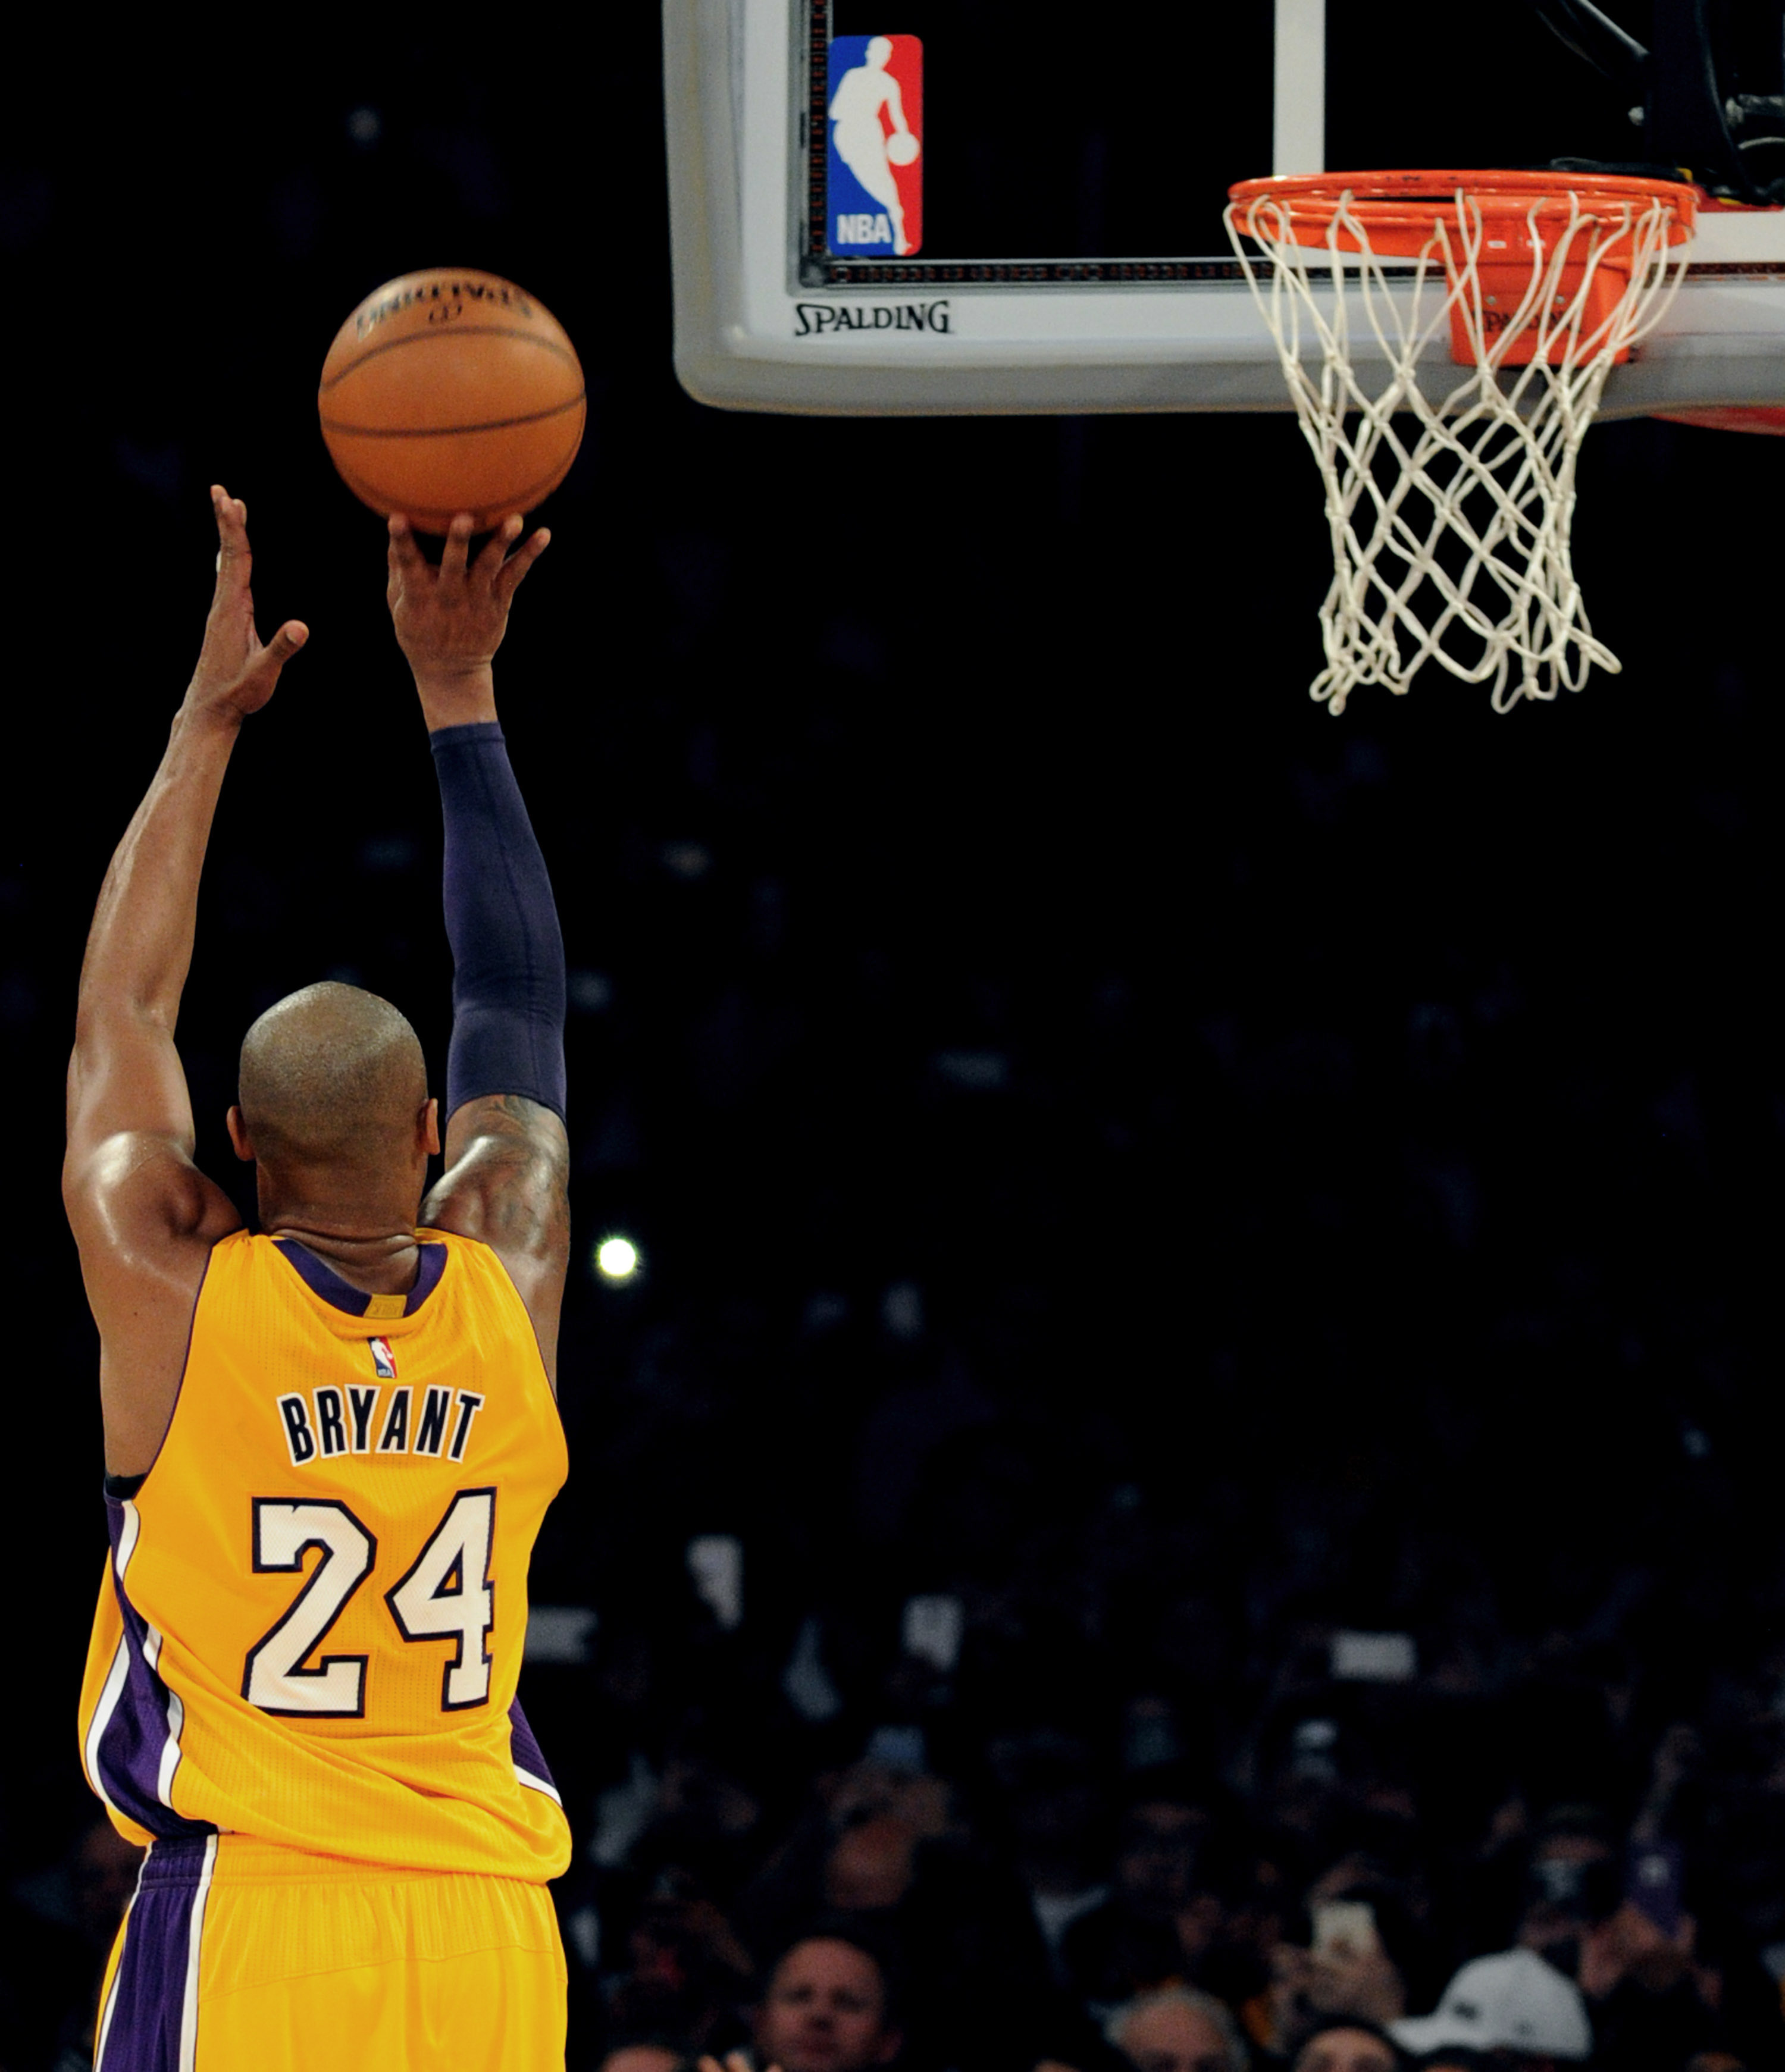 Los Angeles Lakers forward Kobe Bryant shoots a free-throw against the Minnesota Timberwolves in the second half of a NBA basketball game at Staples Center on Tuesday, Feb. 2, 2015 in Los Angeles.  Los Angeles Lakers won 119-115. (Photo by Keith Birmingham/ Pasadena Star-News)